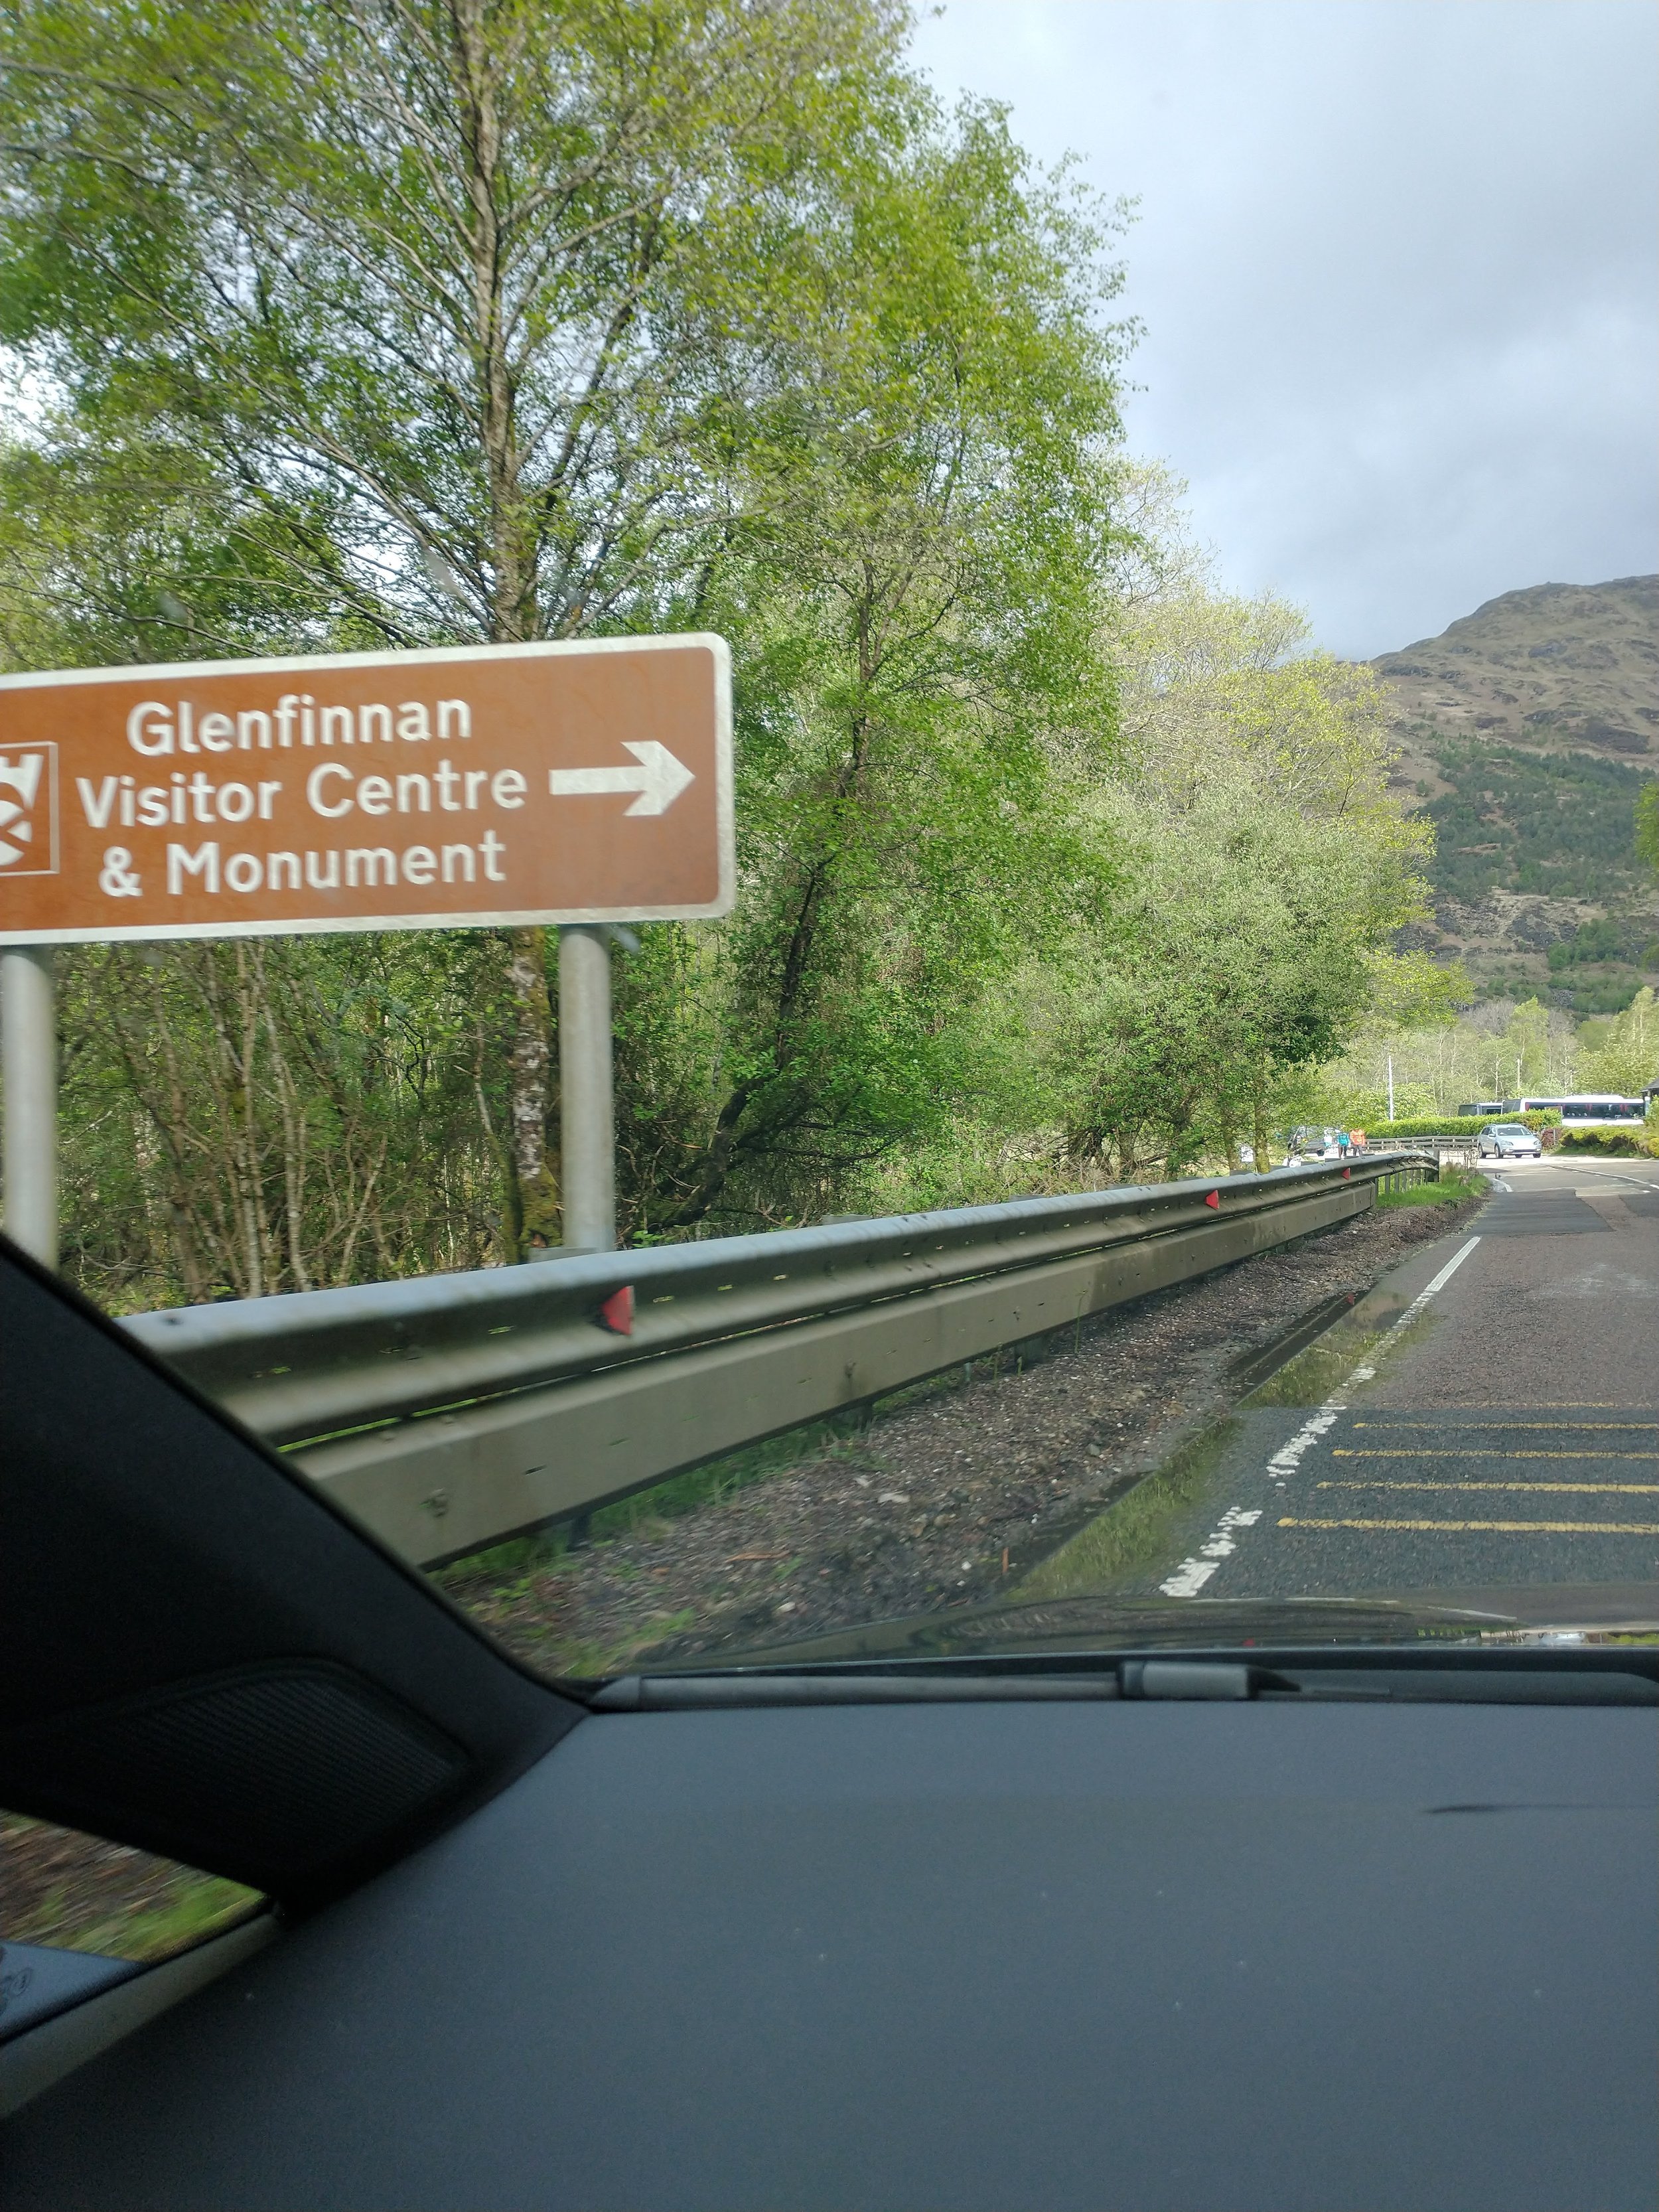 attraction-road-sign-for-glenfinnan-visitor-centre-in-scotland